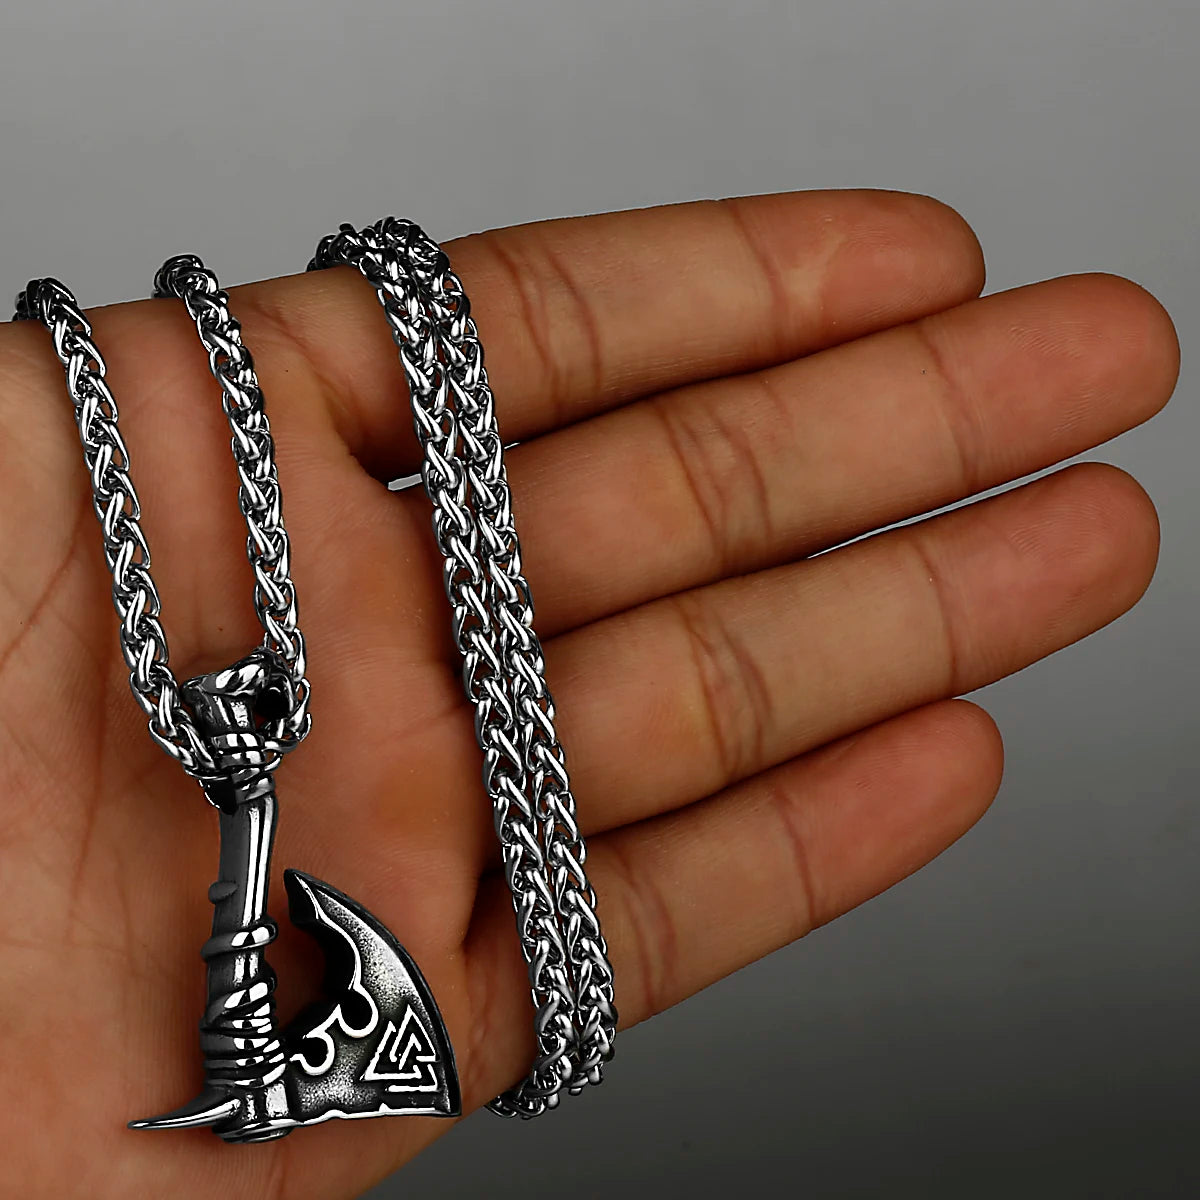 Viking Axe Necklace Pendant - Mythical Pieces Only Pendant / WJ 70